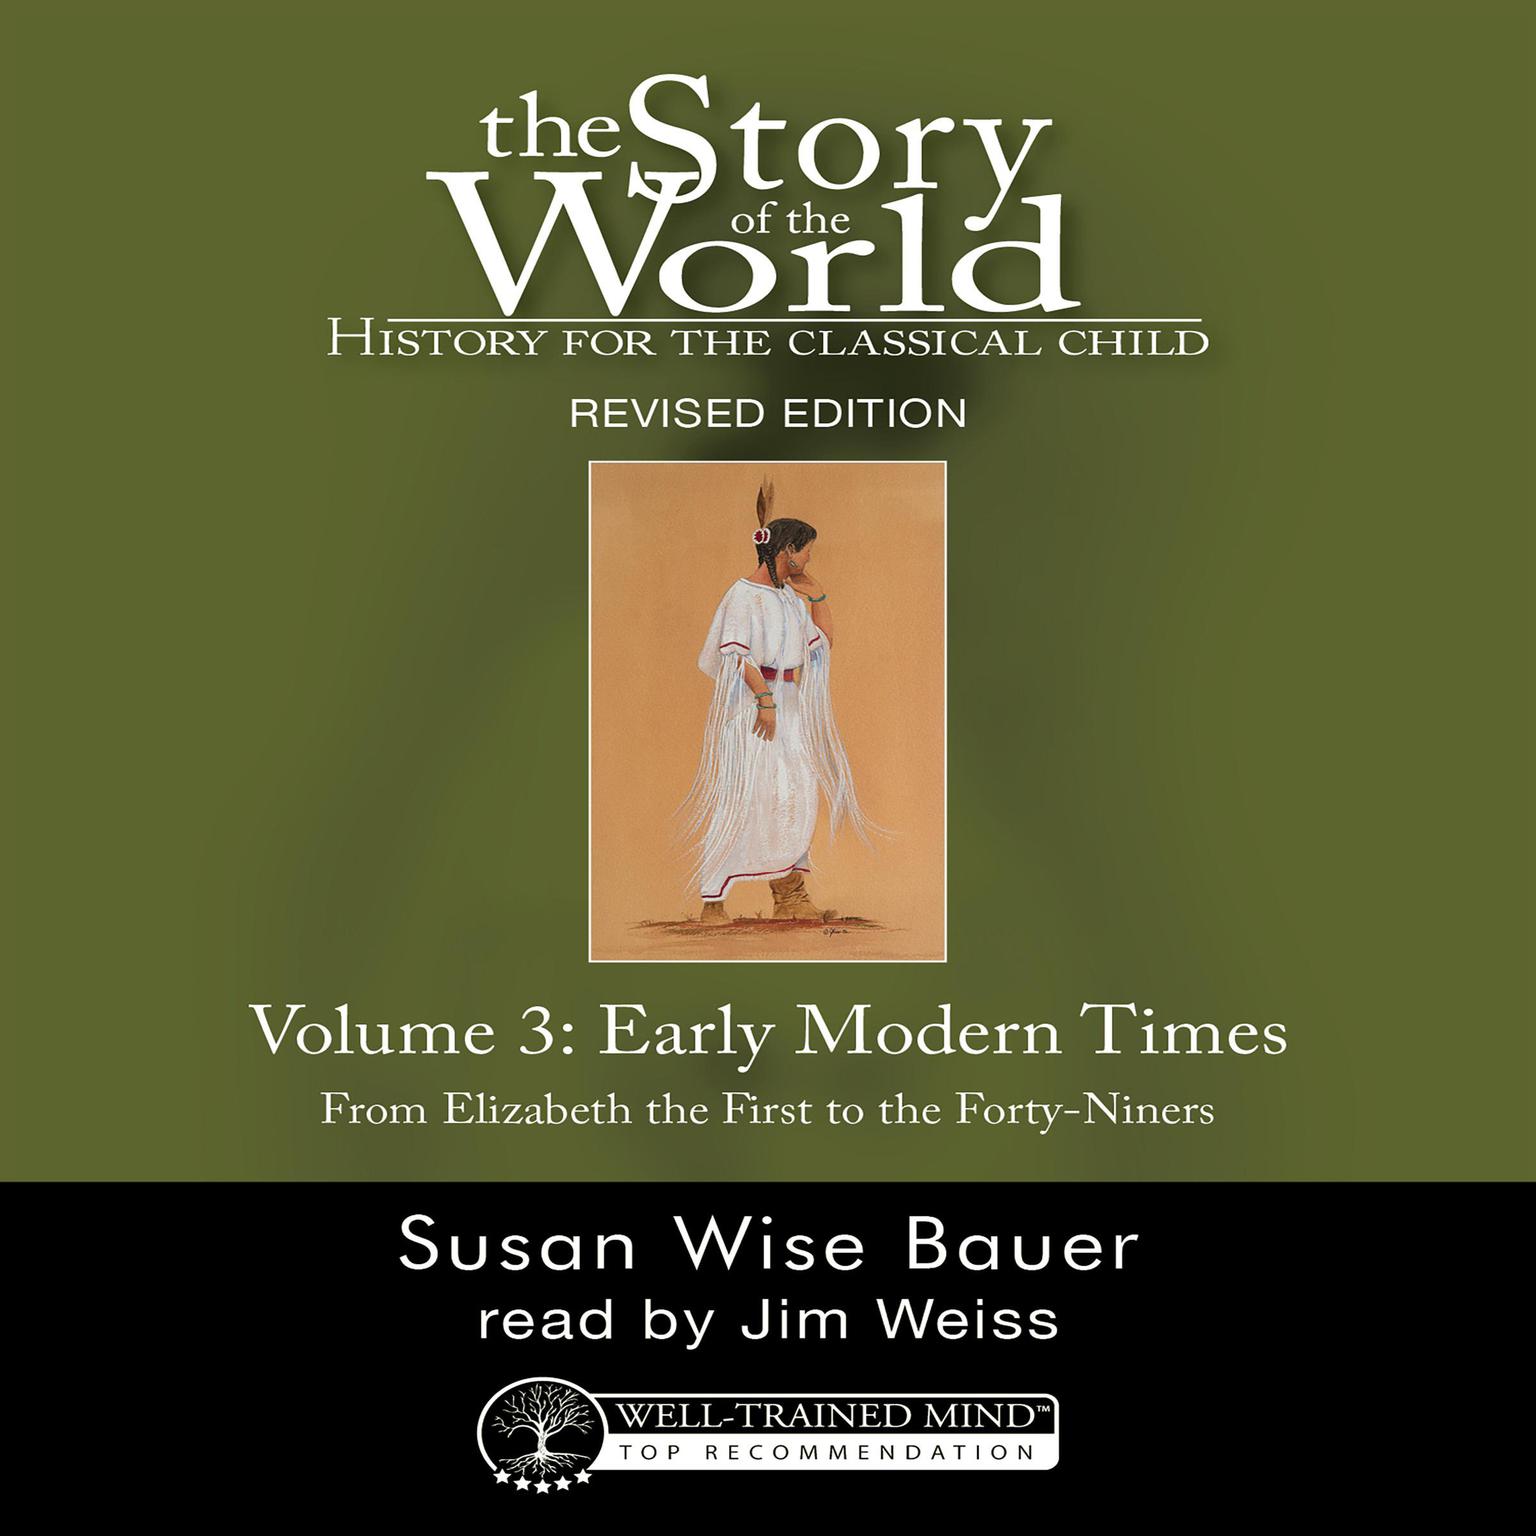 The Story of the World, Vol. 3 Audiobook, Revised Edition Audiobook, by Susan Wise Bauer